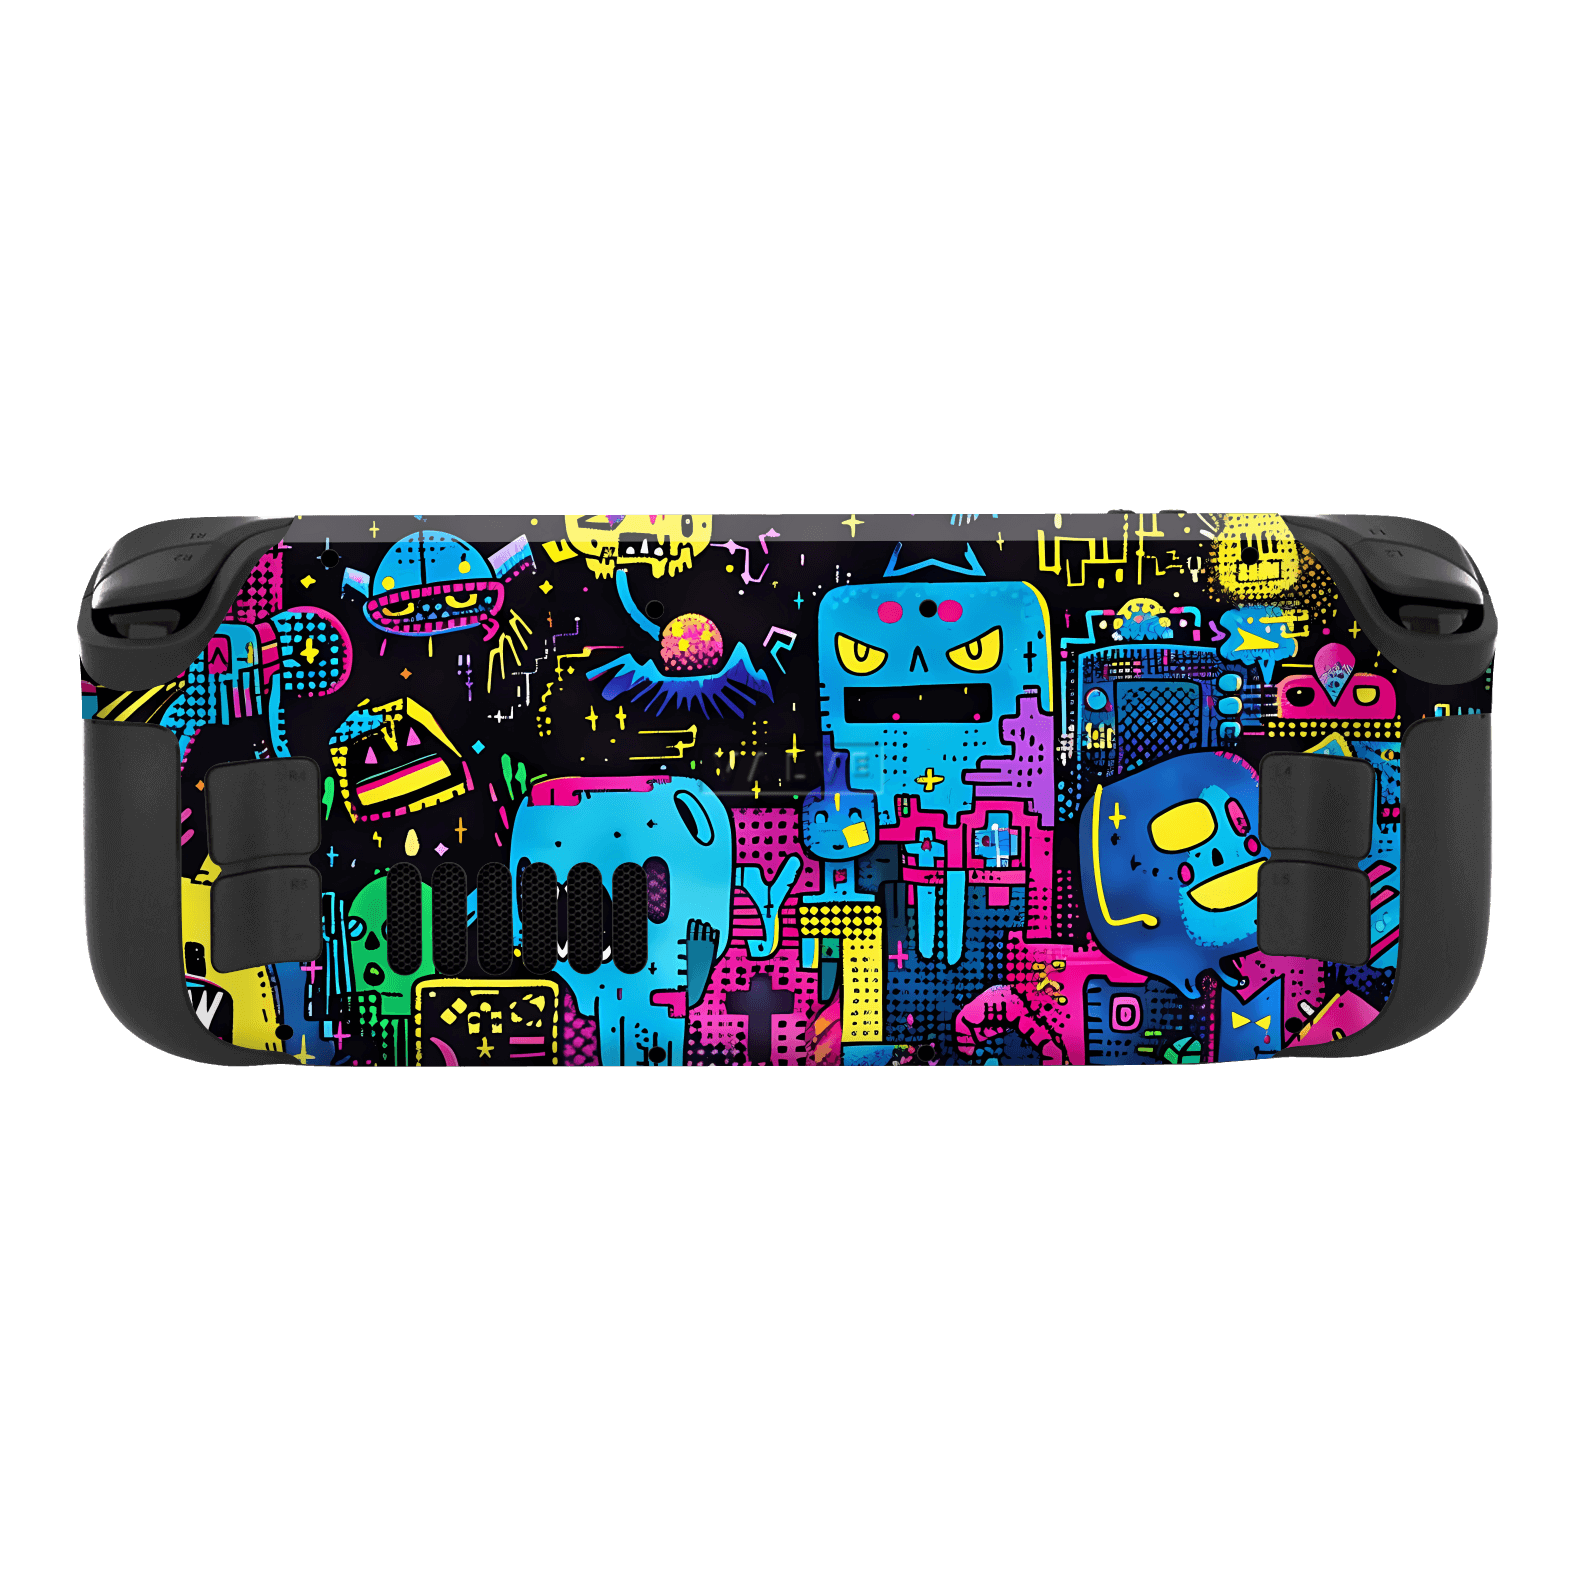 Steam Deck OLED Print Printed Custom SIGNATURE Arcade Rave Gaming Gamer Pixel Skin Wrap Sticker Decal Cover Protector by QSKINZ | QSKINZ.COM